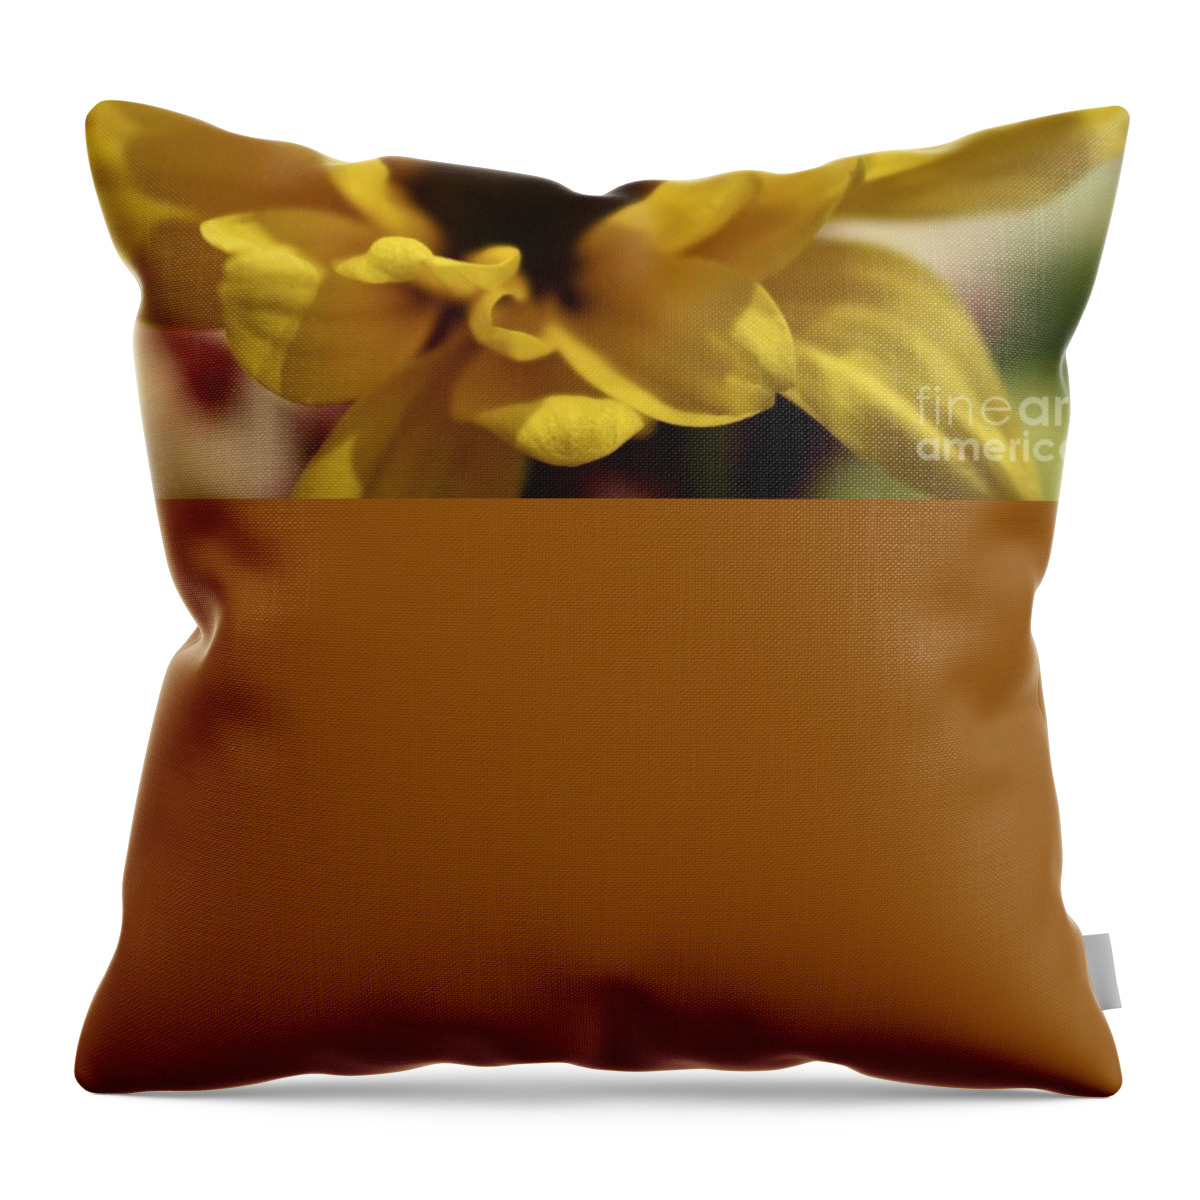 Yellow Throw Pillow featuring the photograph Flowers by Deena Withycombe